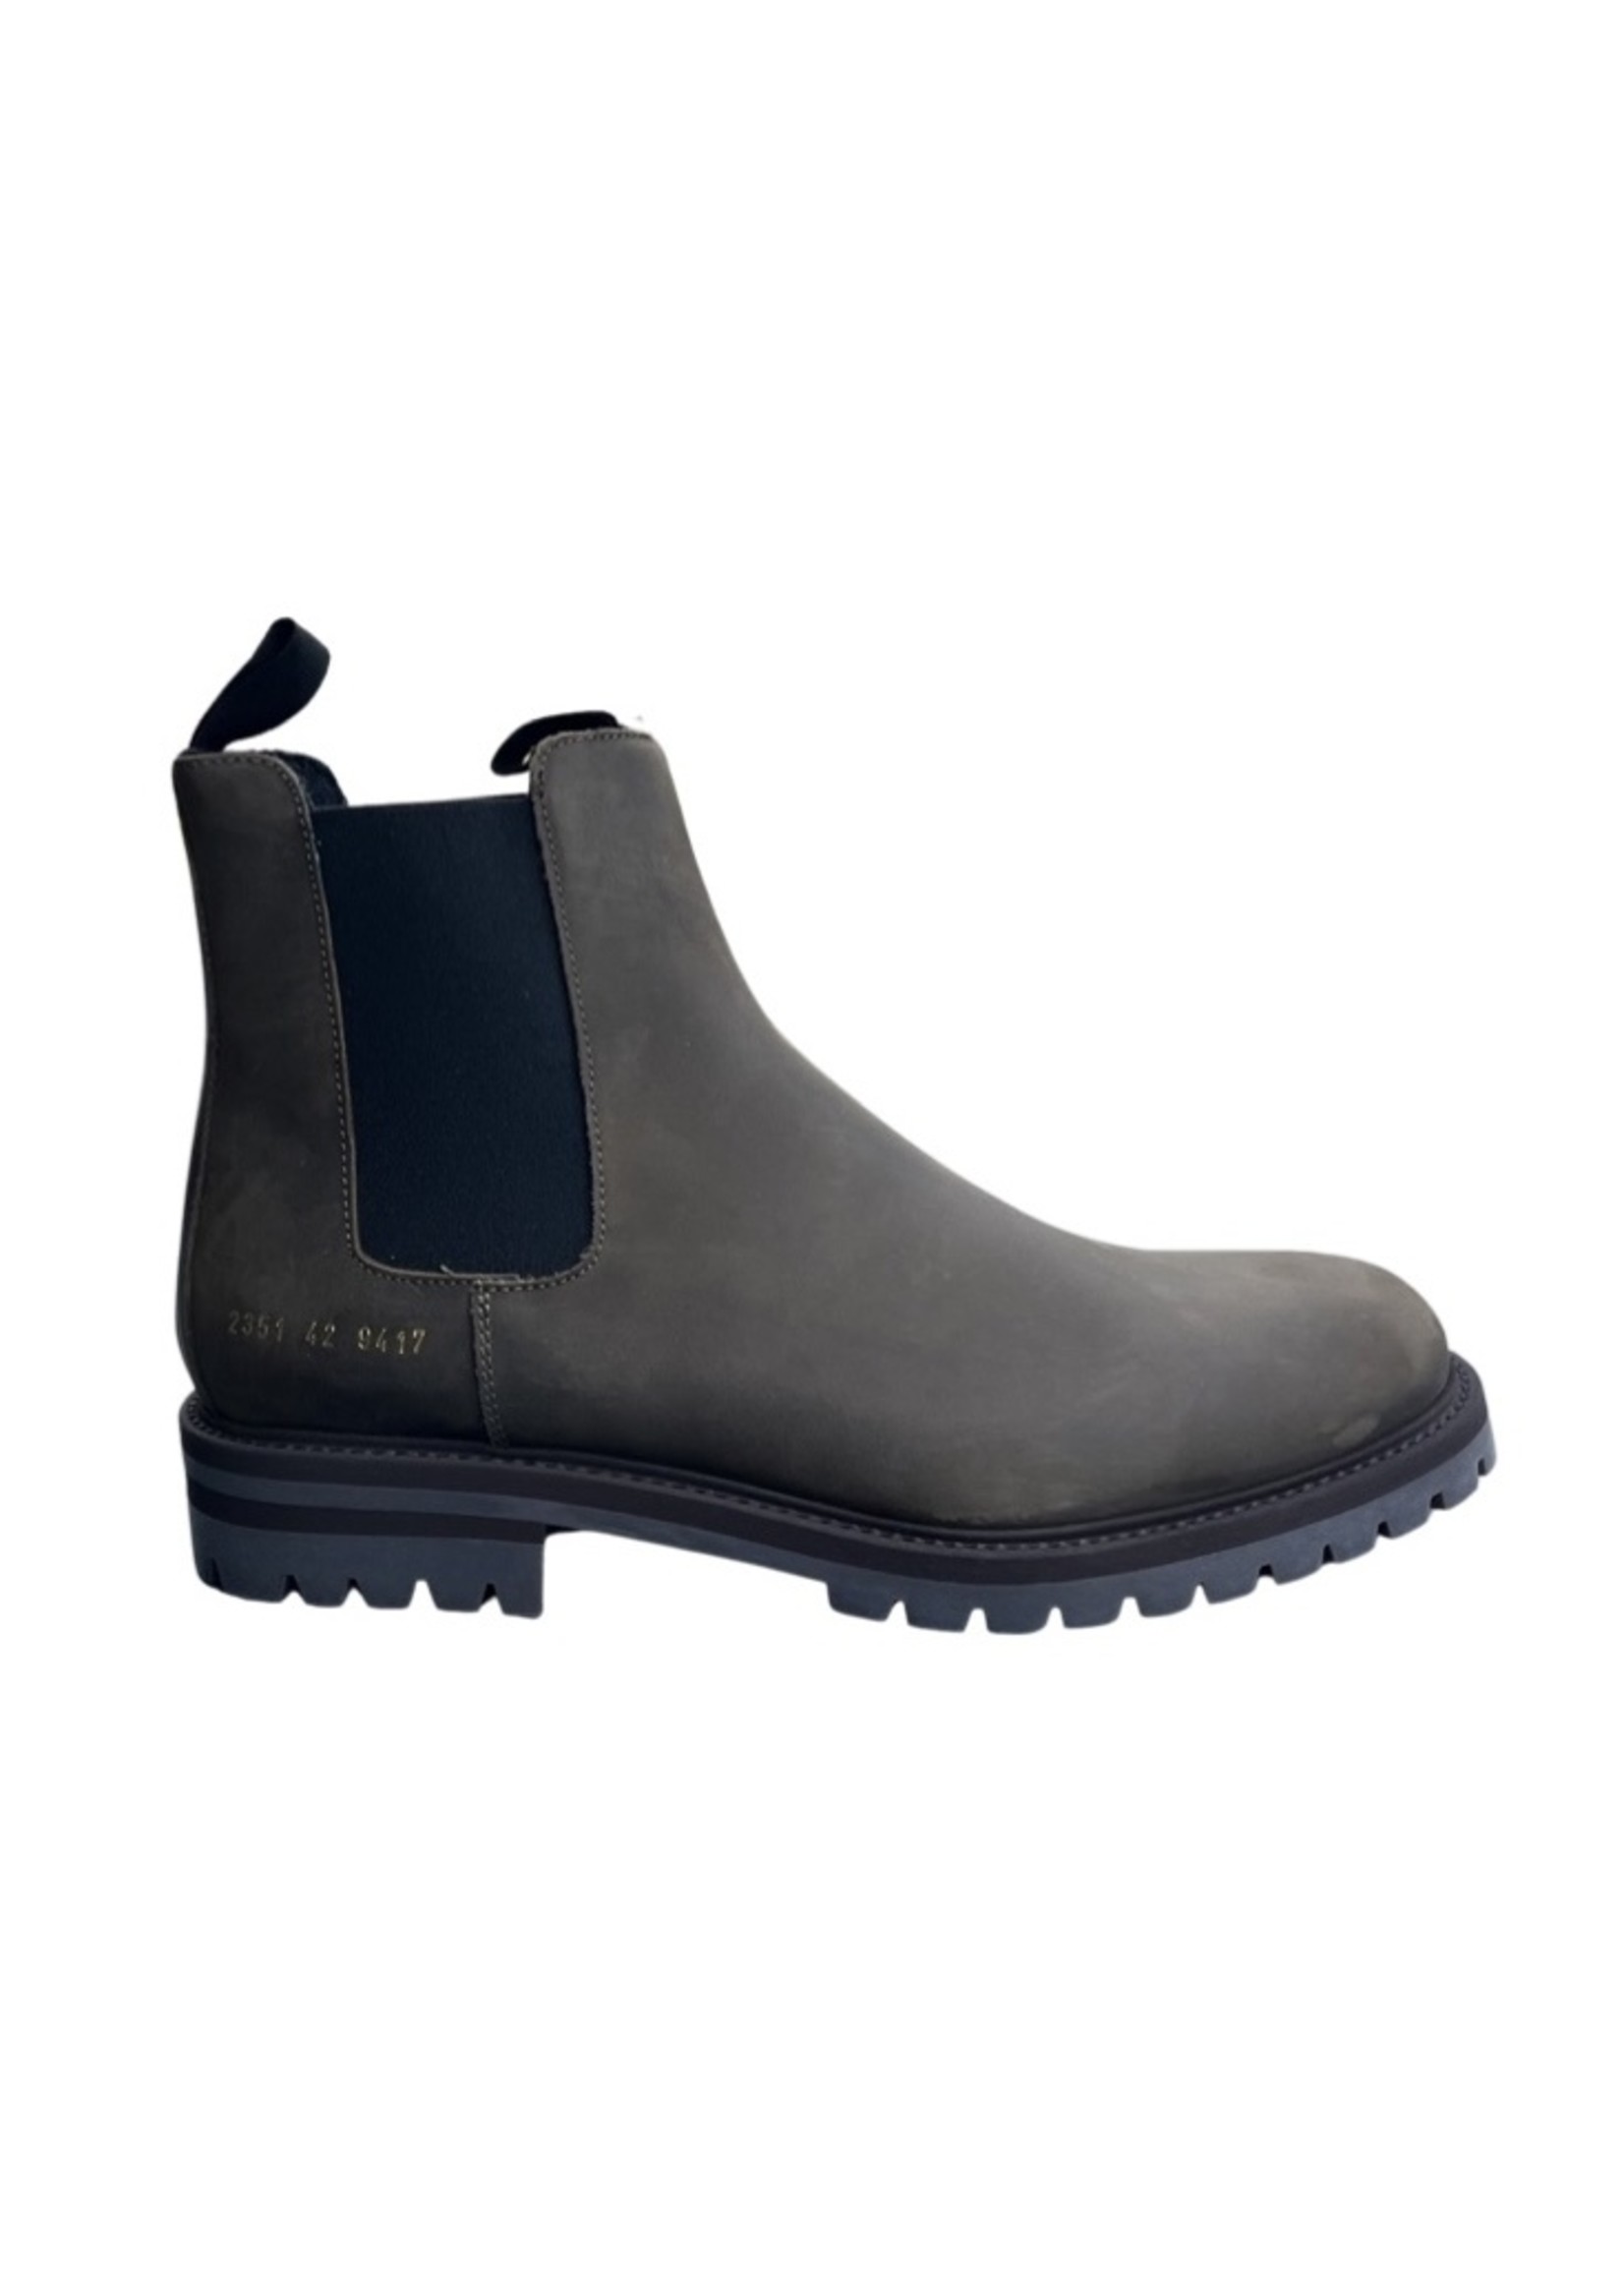 COMMON PROJECTS WINTER CHELSEA BOOT